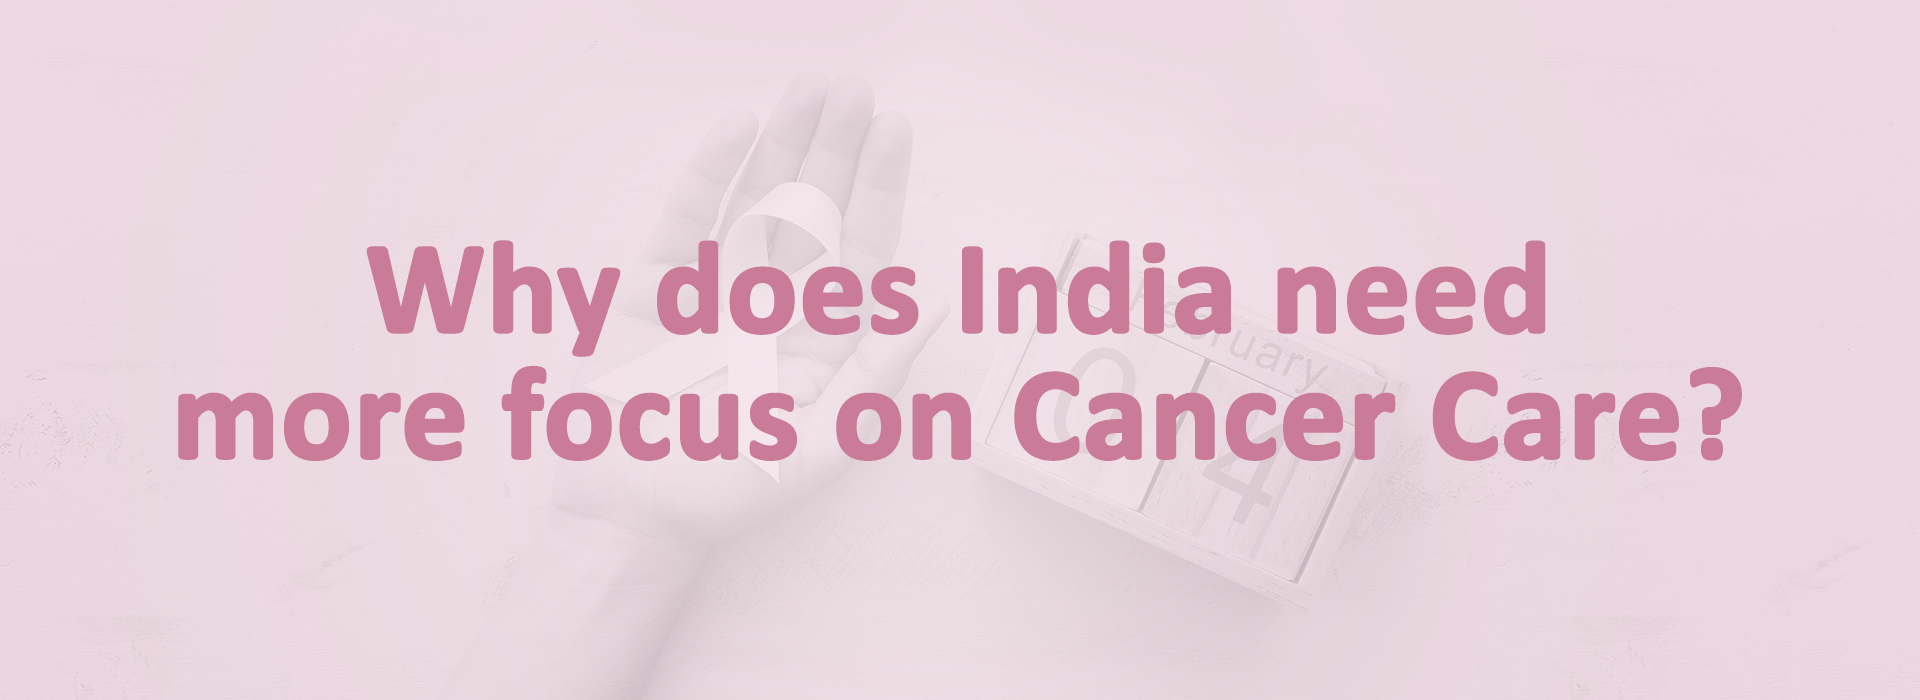 Why does India need more focus on Cancer Care?